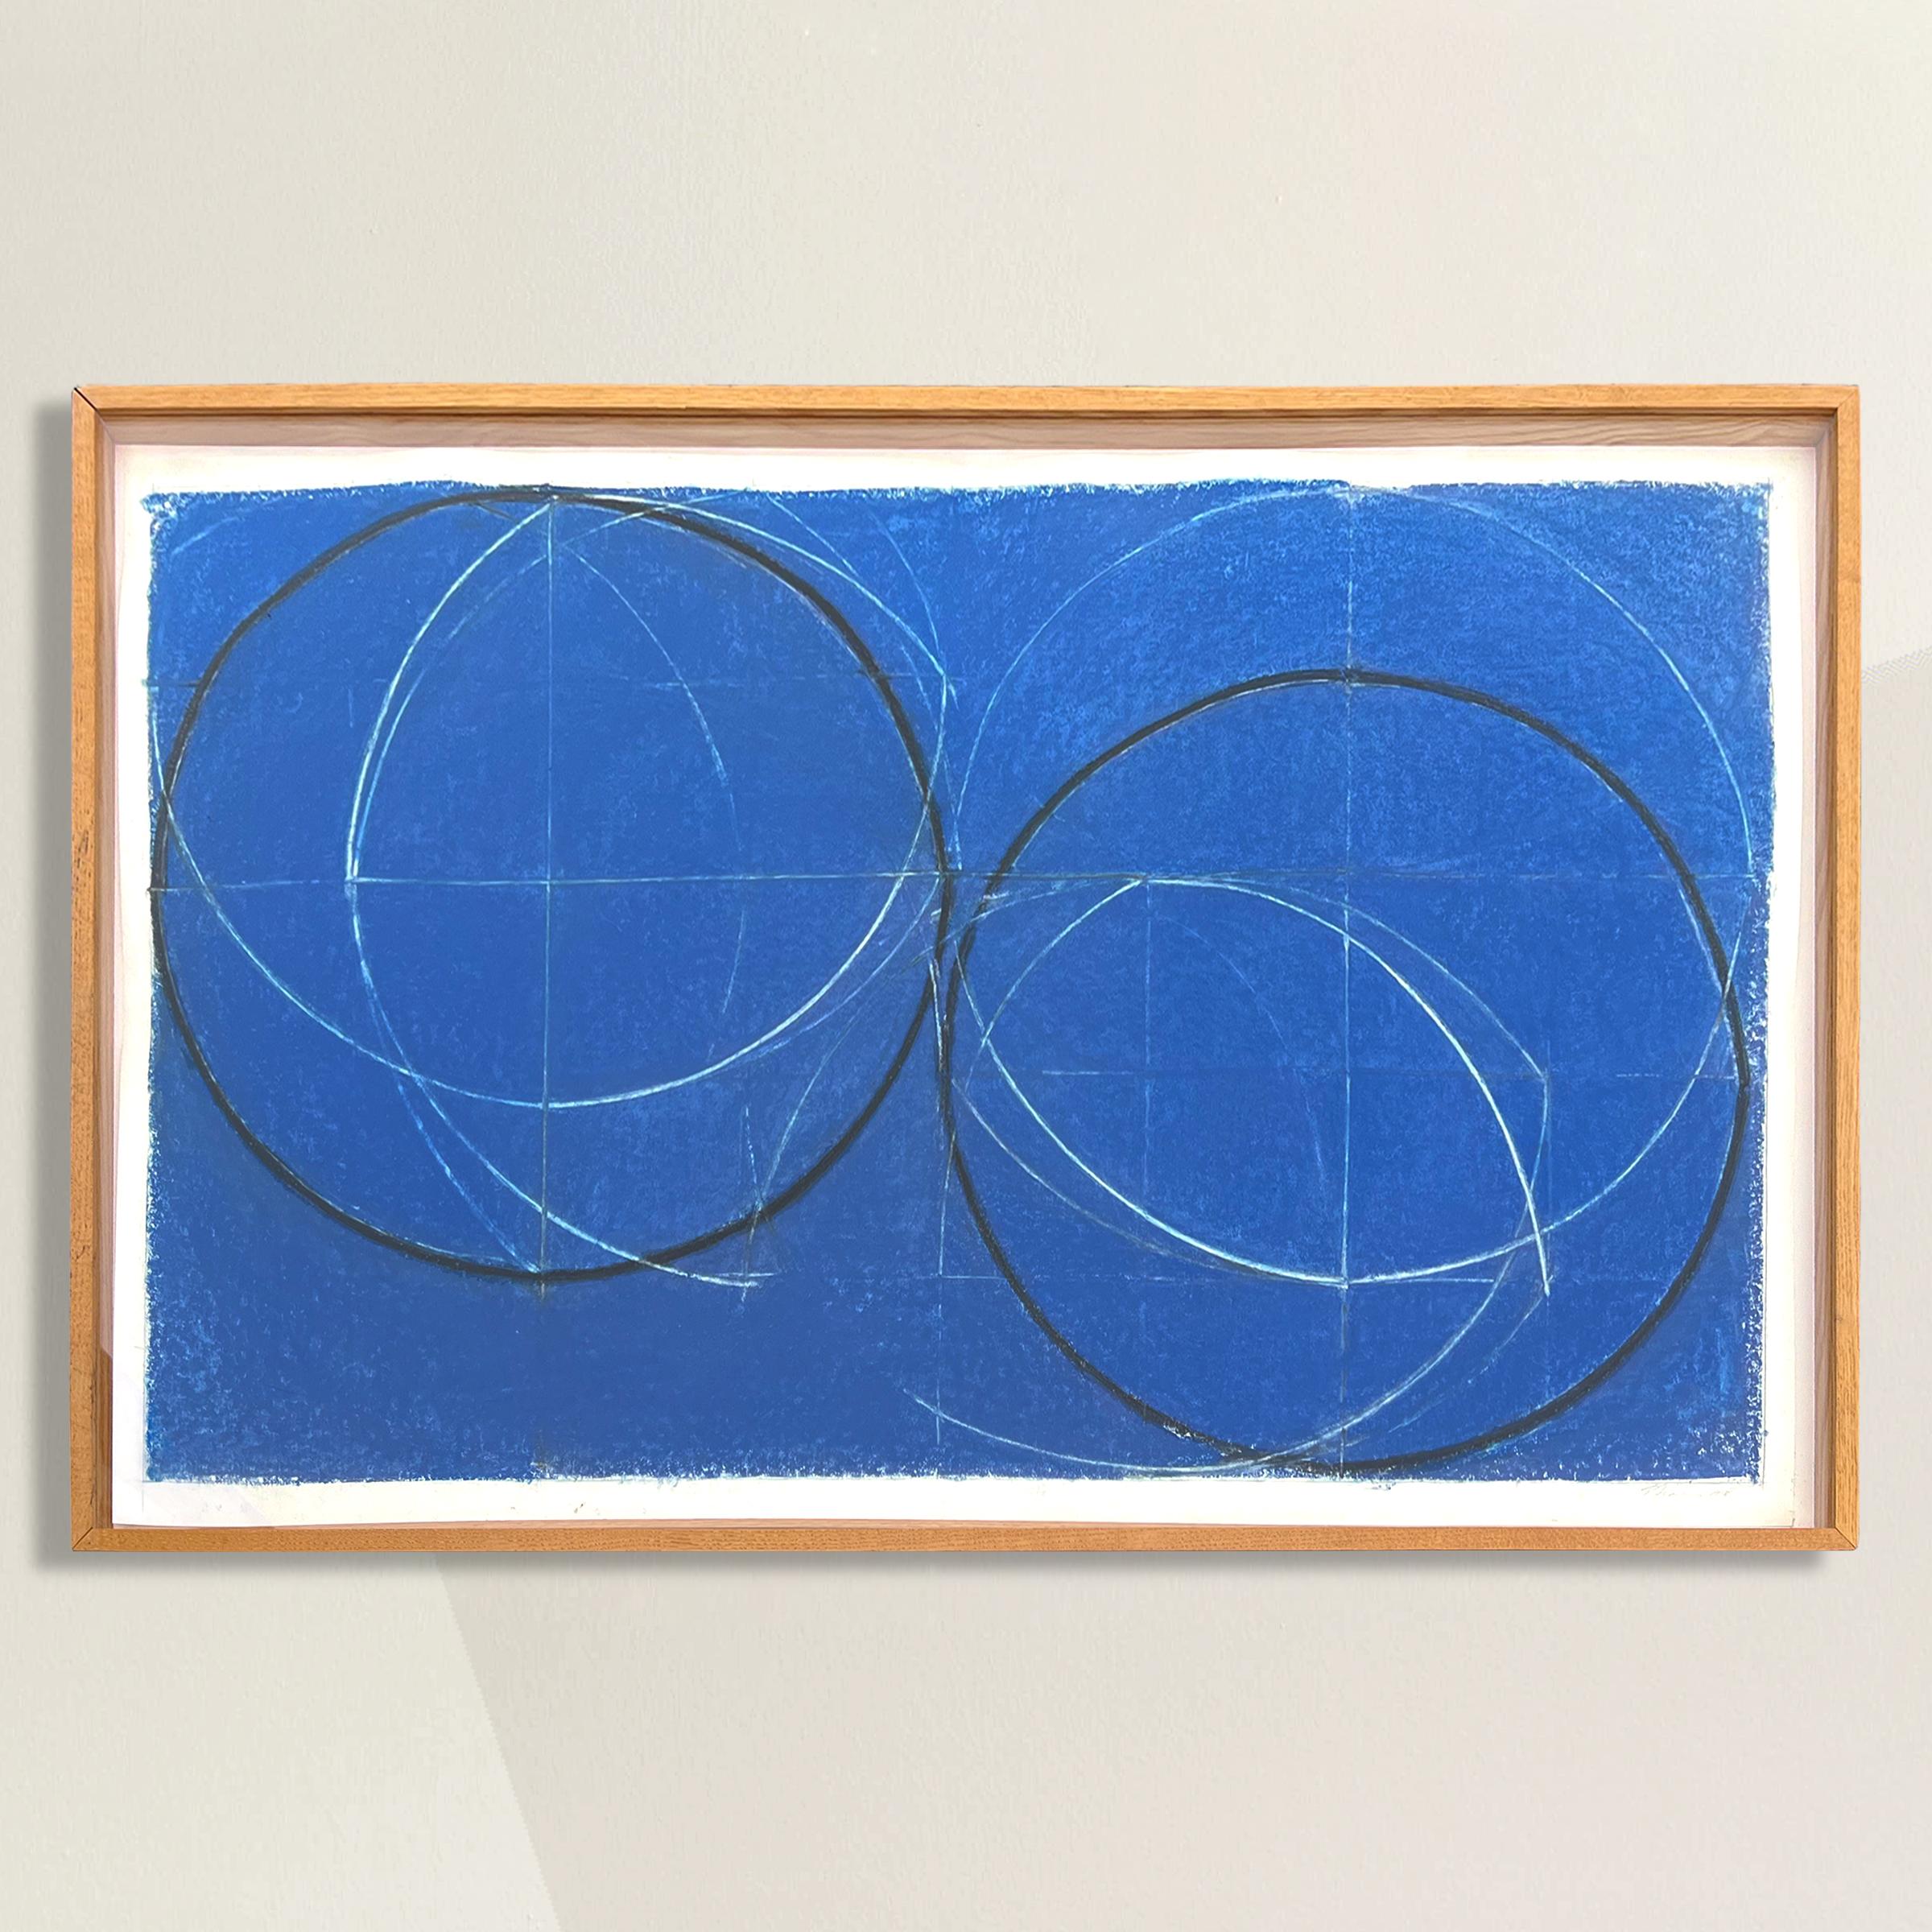 A chic and impactful American Minimalist geometric drawing with two large charcoal circles, several interlocking white circles, and set against a bold cobalt blue pastel background. Framed in a custom oak gallery frame. Signed and dated illegibly in